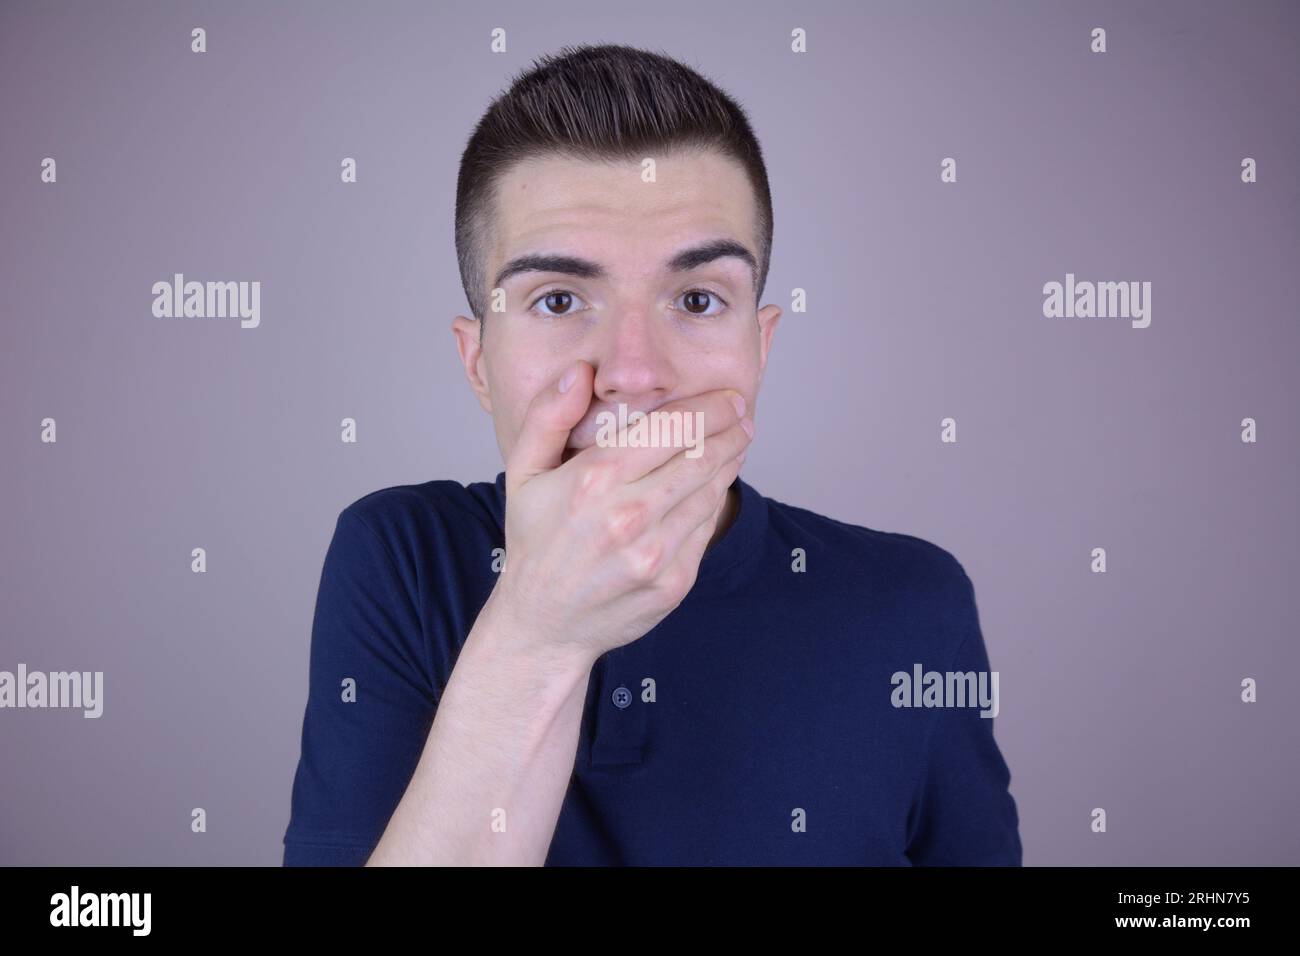 Handsome Caucasian Man Covering Mouth with Hand on Isolated Background Stock Photo